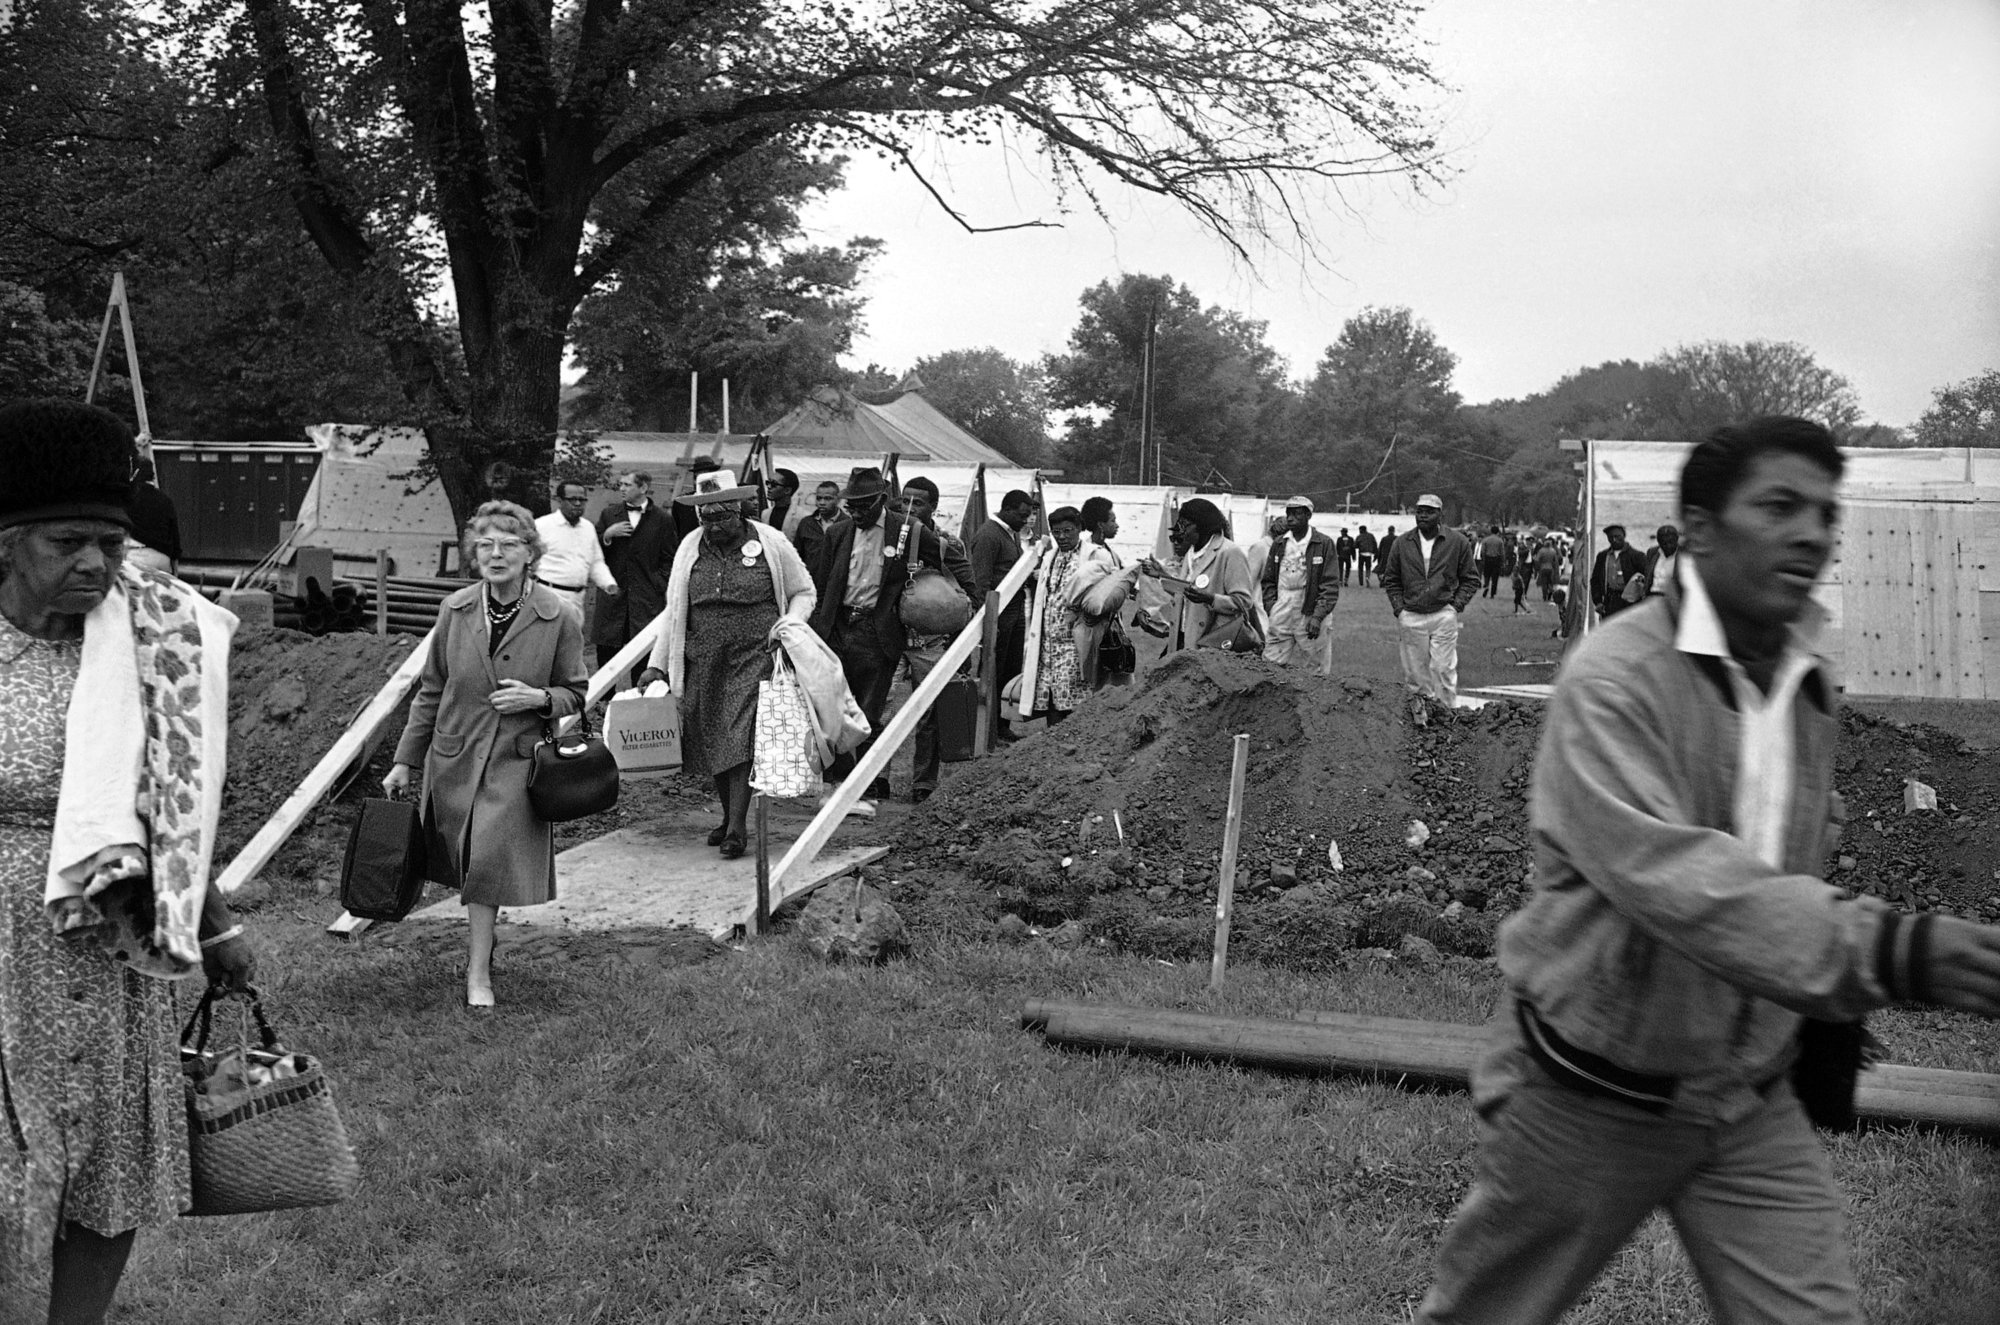 Workmen set up flooring and A-frames for the wooden camp near Lincoln Memorial to house the Poor Peoples Campaign demonstrators in Washington, May 13, 1968. A federal permit allows the demonstrators to occupy the 15-acre area until on June 16 and limits occupants to 3,000. (AP Photo/Bob Schutz)